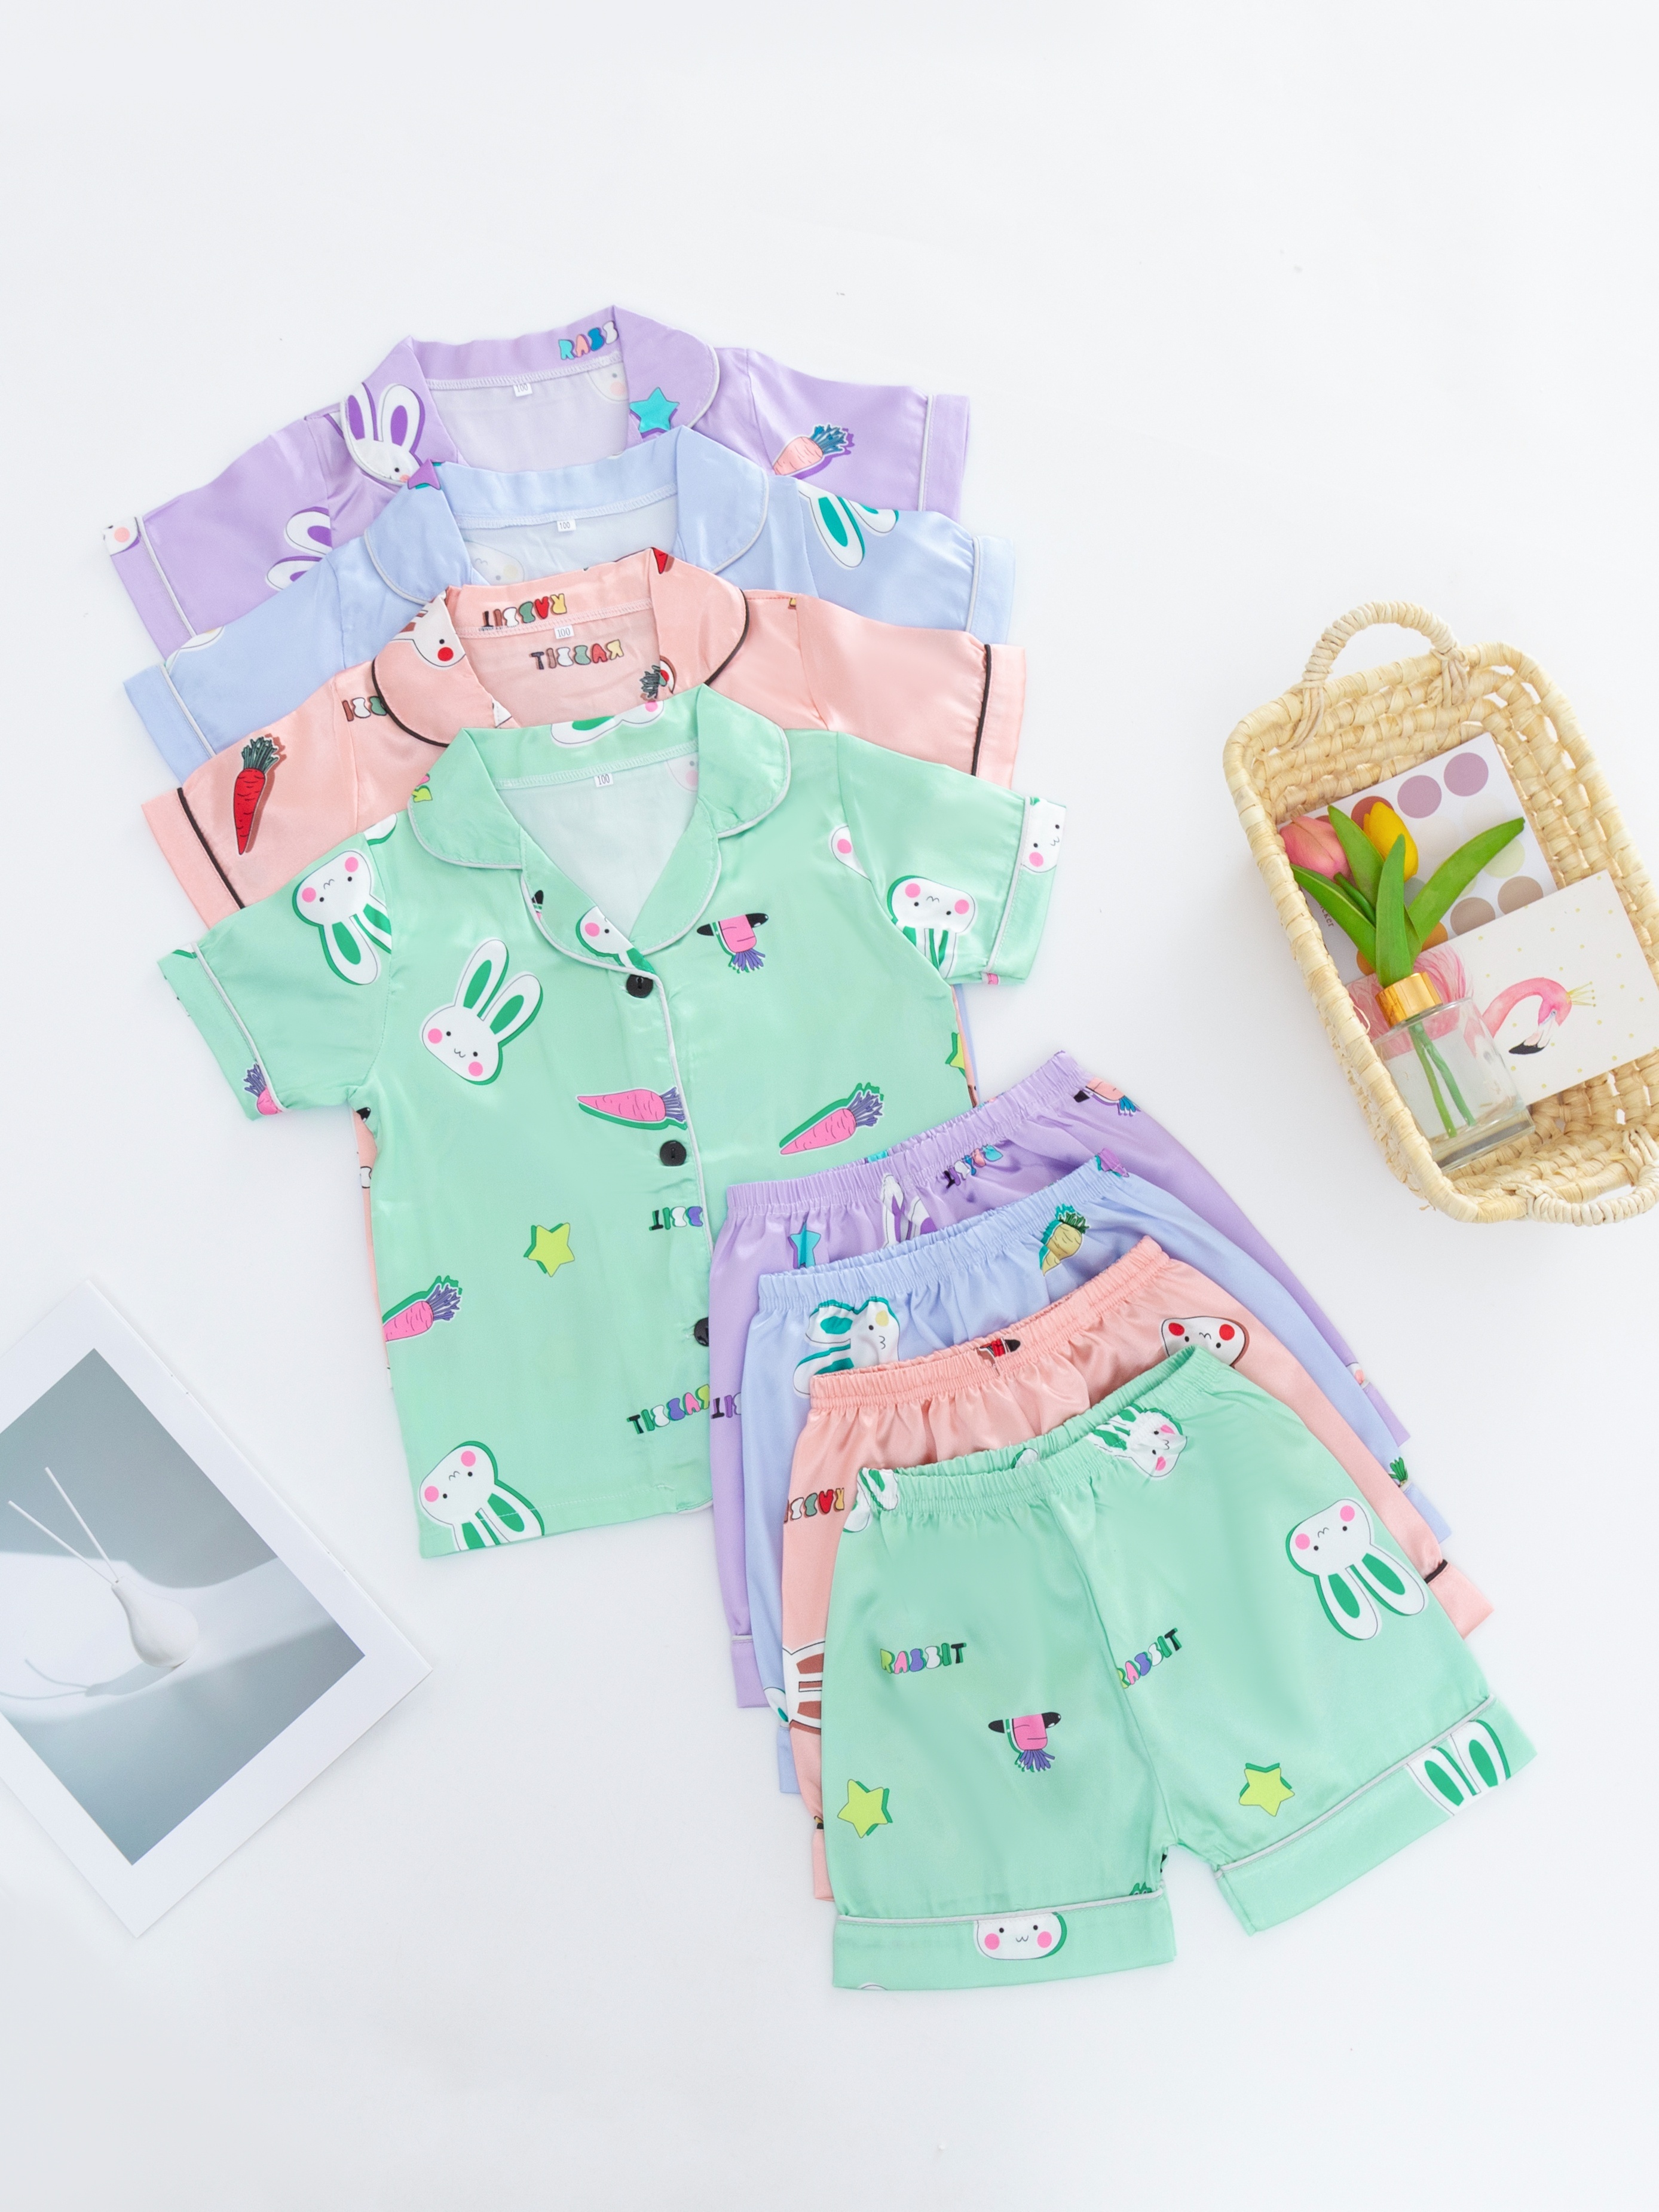 PAJAMA SETS FOR TODDLERS